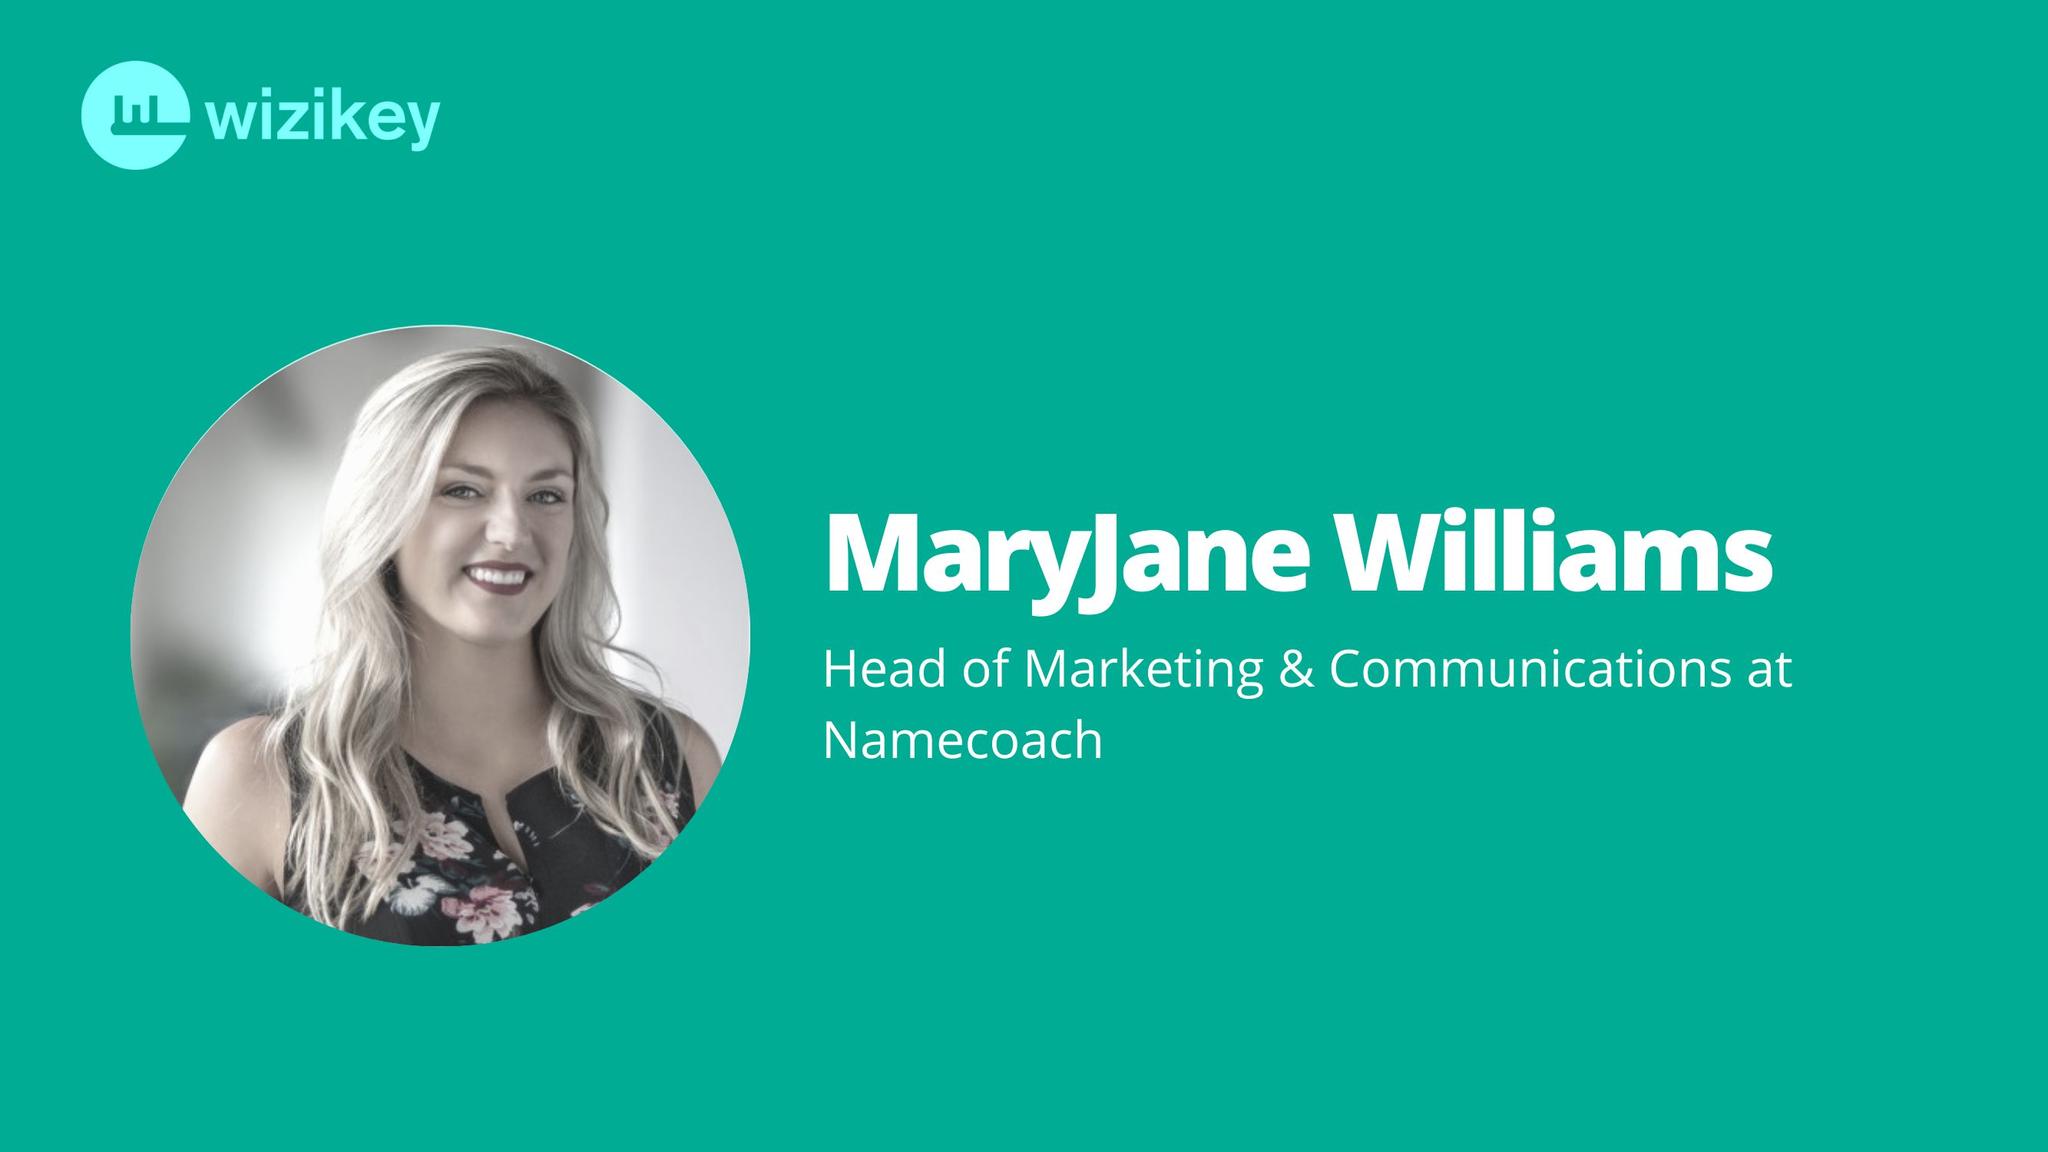 “Don’t make any assumptions, let the data speak for itself “-Maryjane from Namecoach